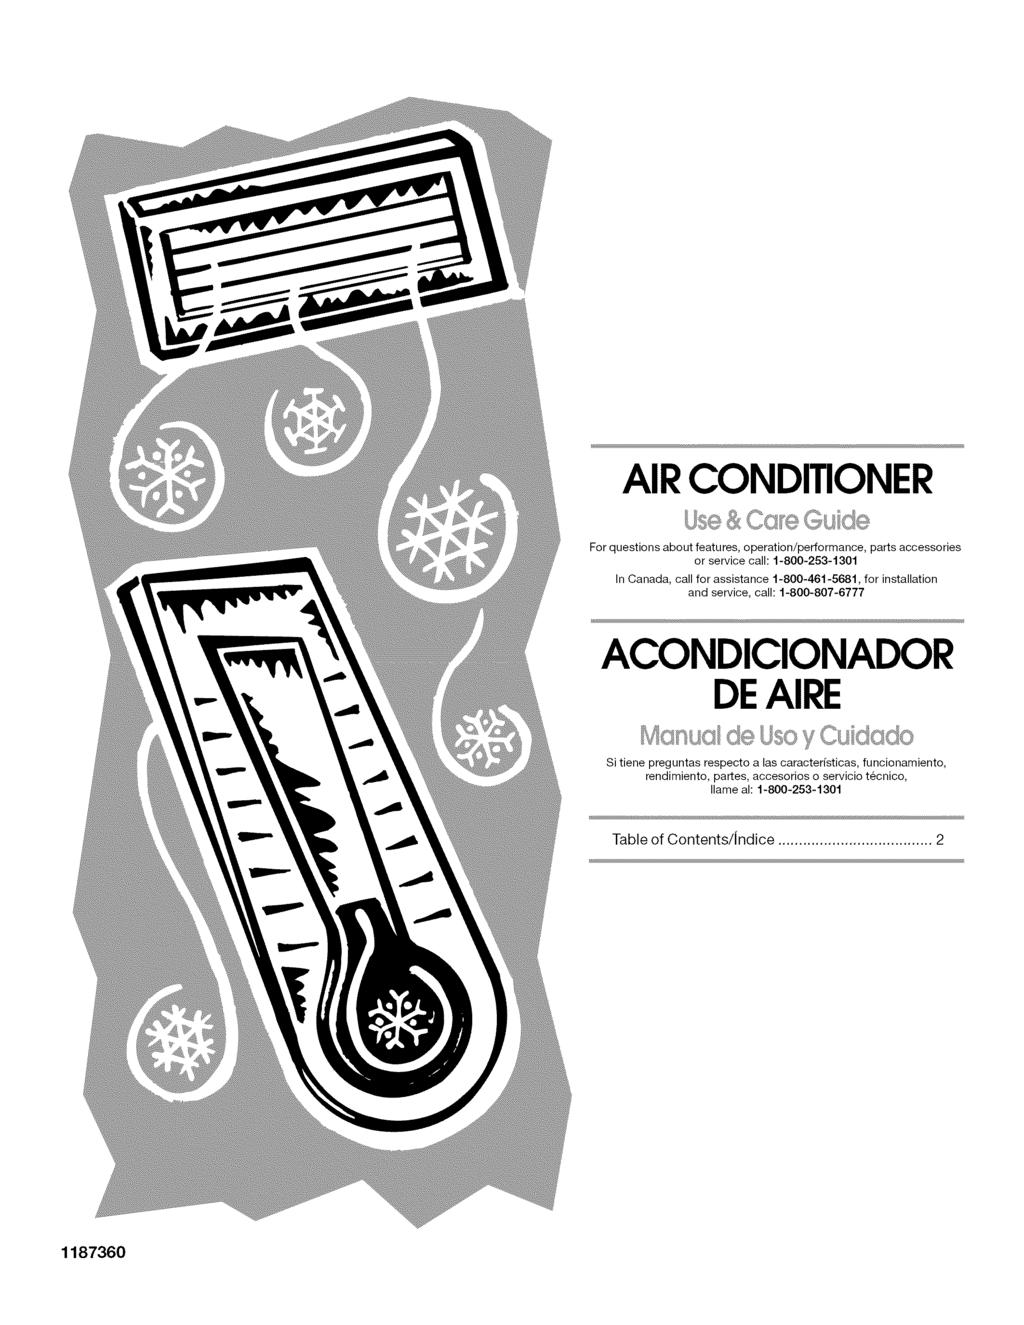 AIR CONDITIONER For questions about features, operation/performance, parts accessories or service call: 1-800-253-1301 In Canada, call for assistance 1-800-461-5681, for installation and service,